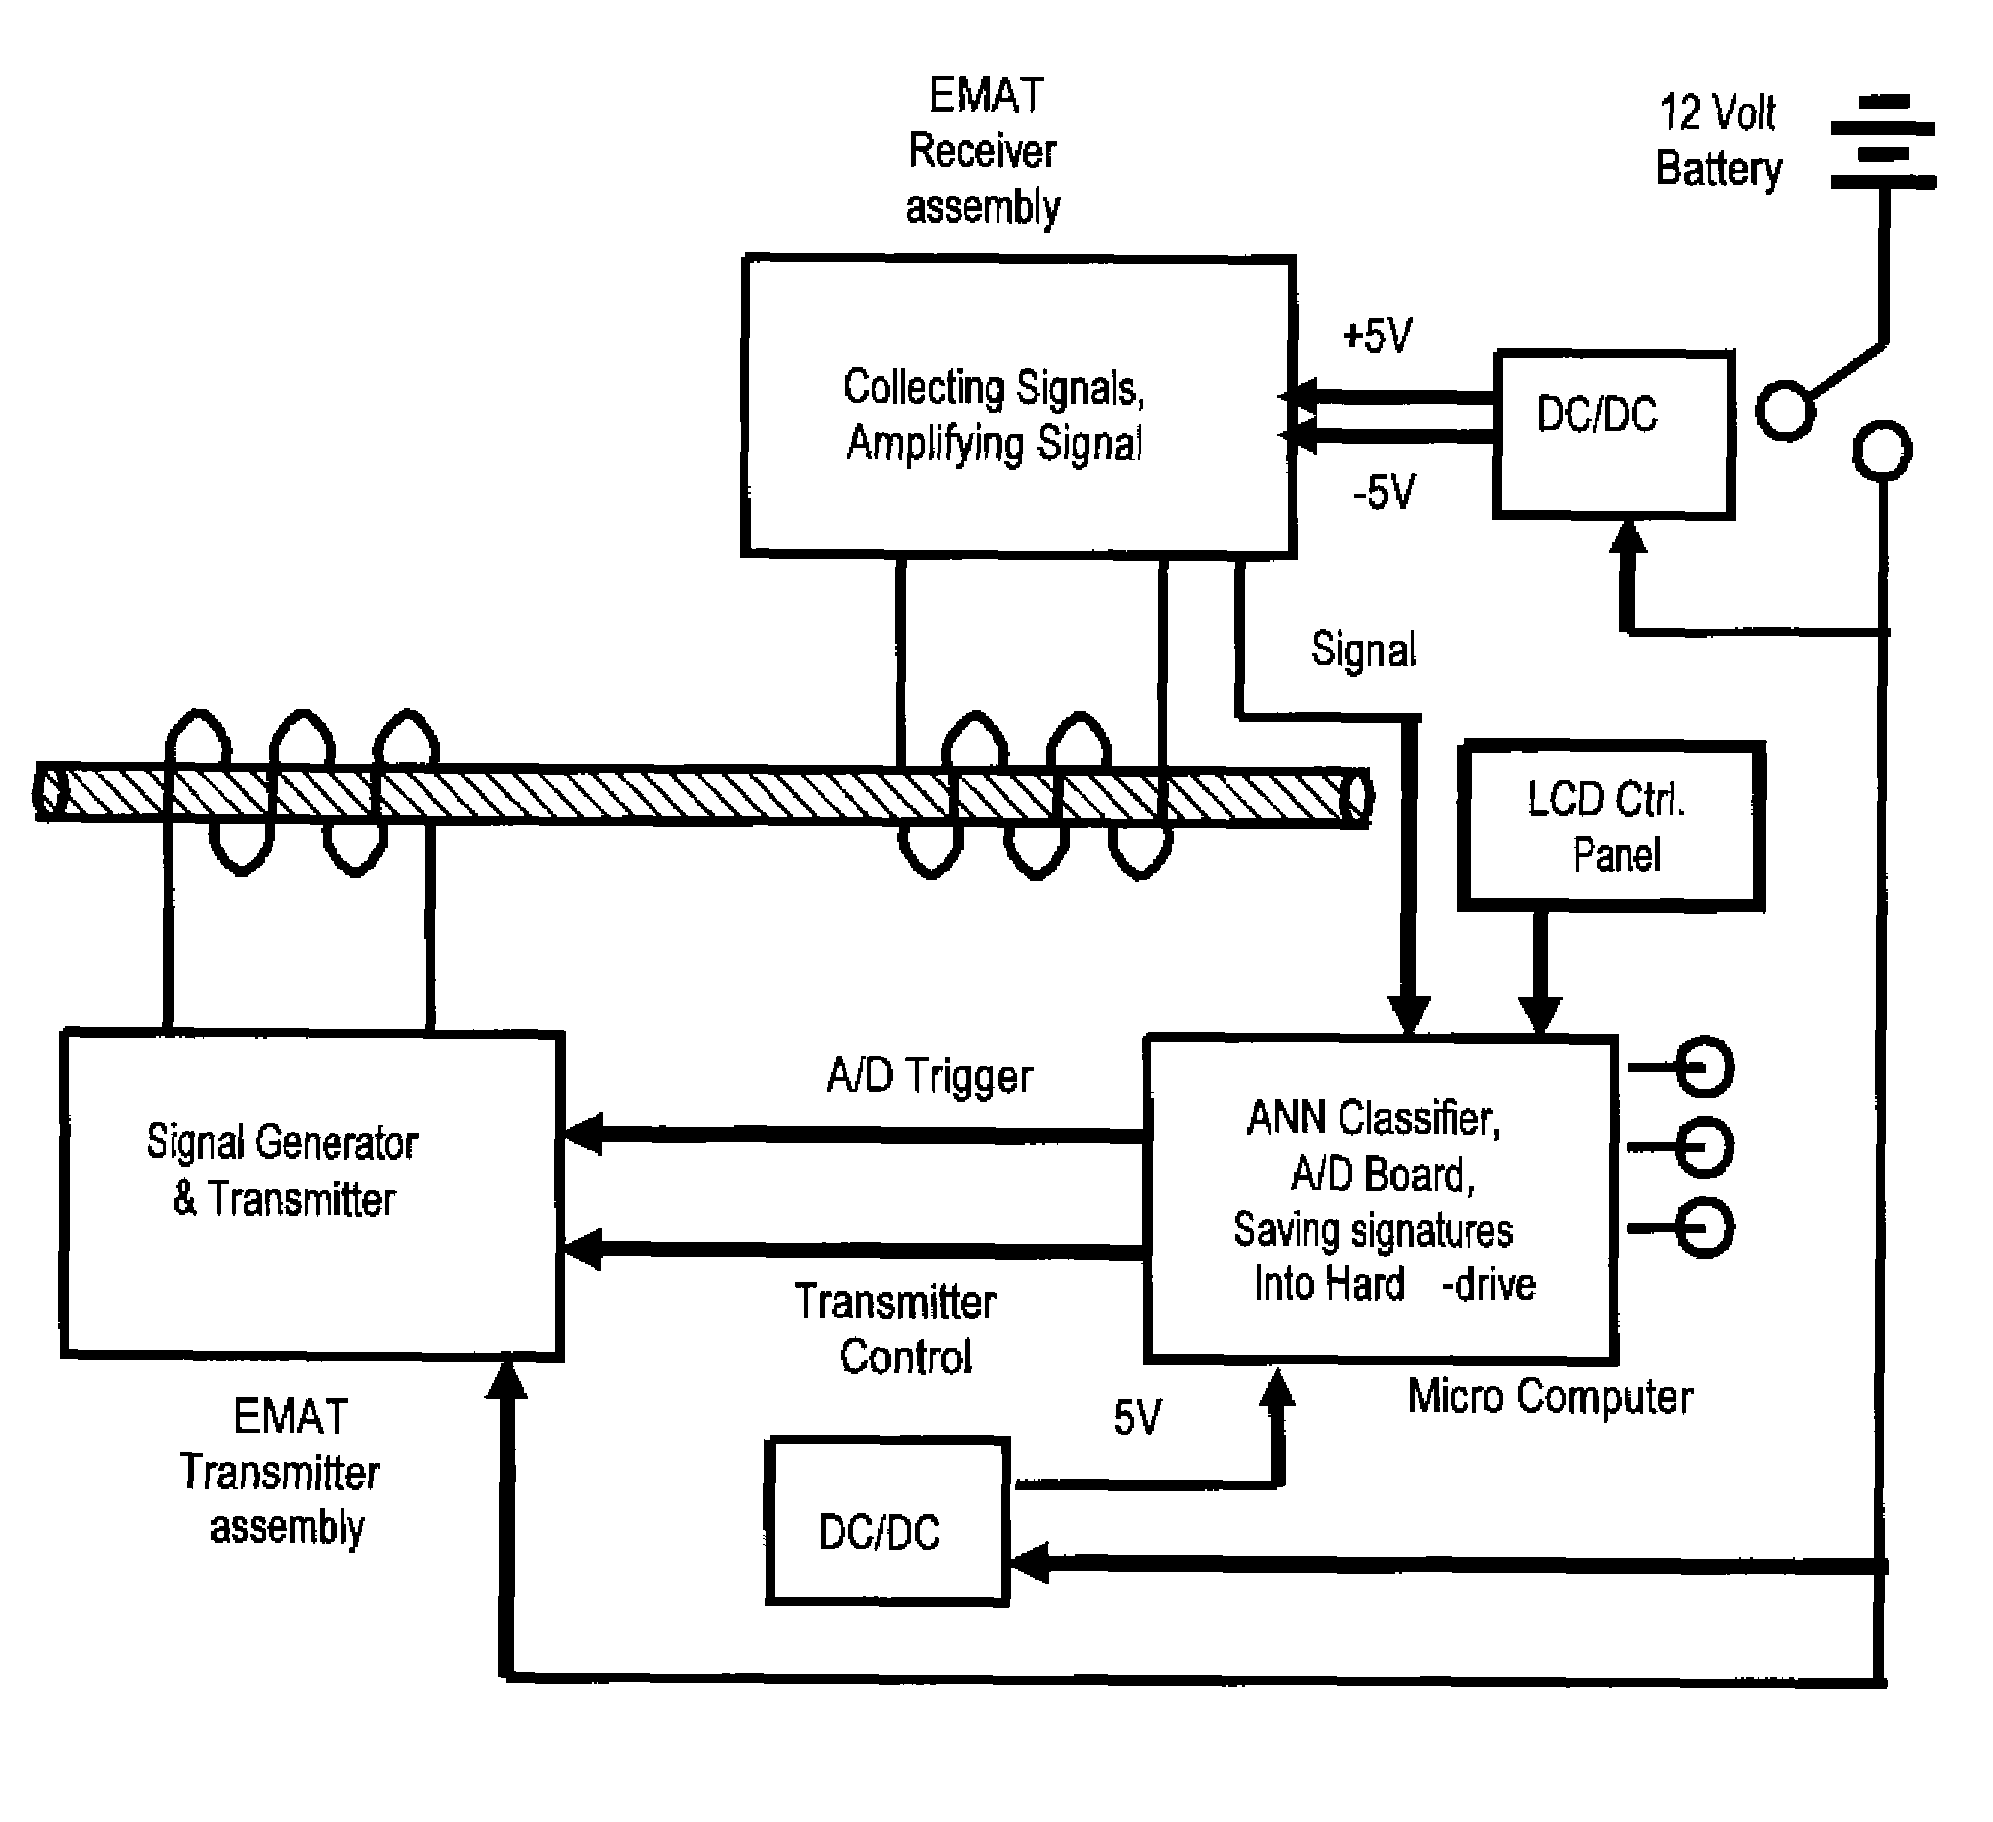 Self-contained apparatus for inspection of electric conductors